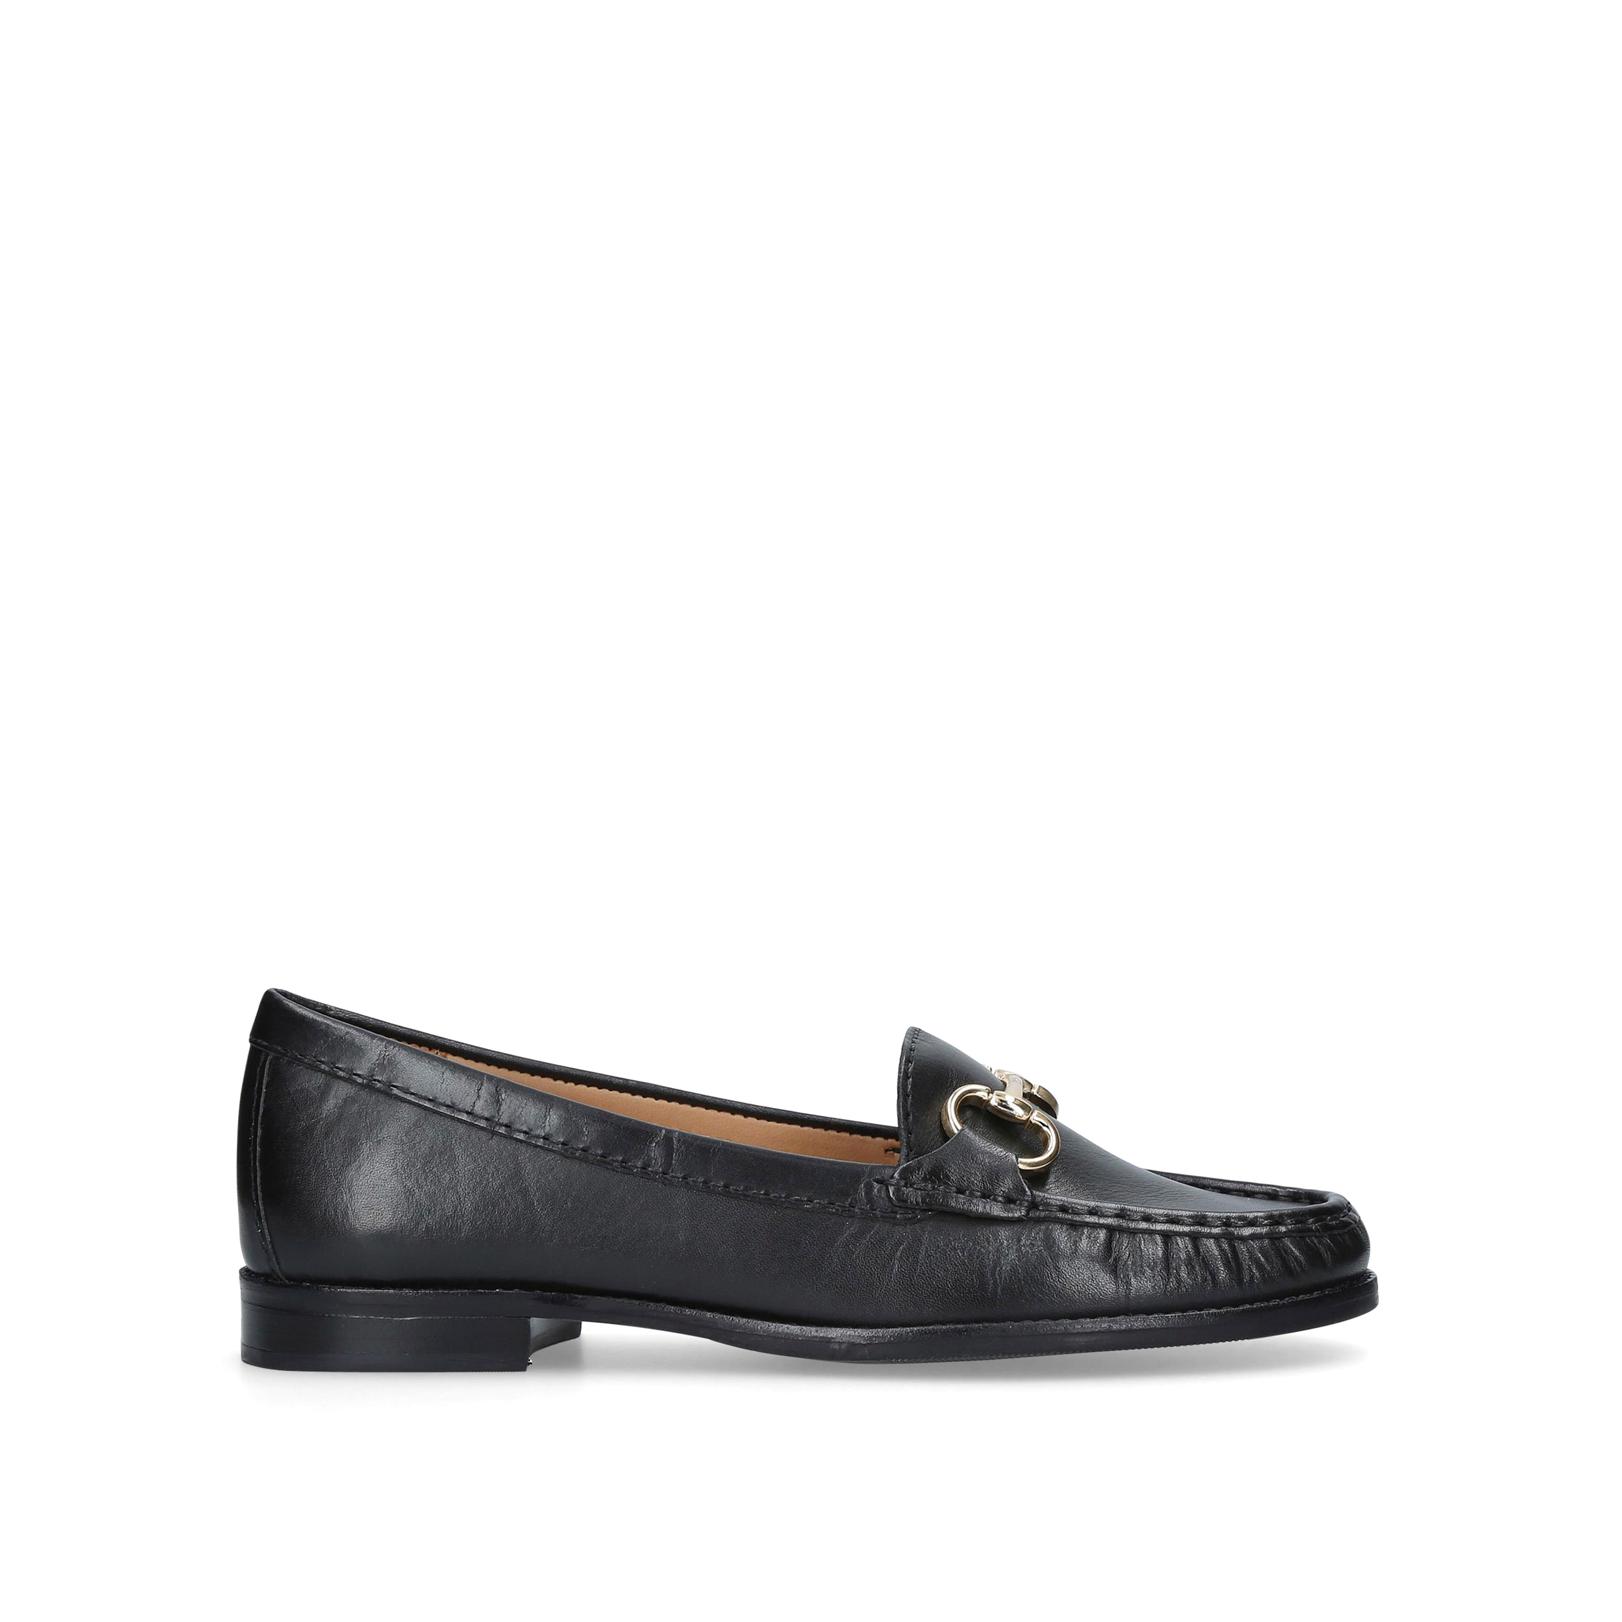 CLICK Black Leather Loafers by CARVELA COMFORT